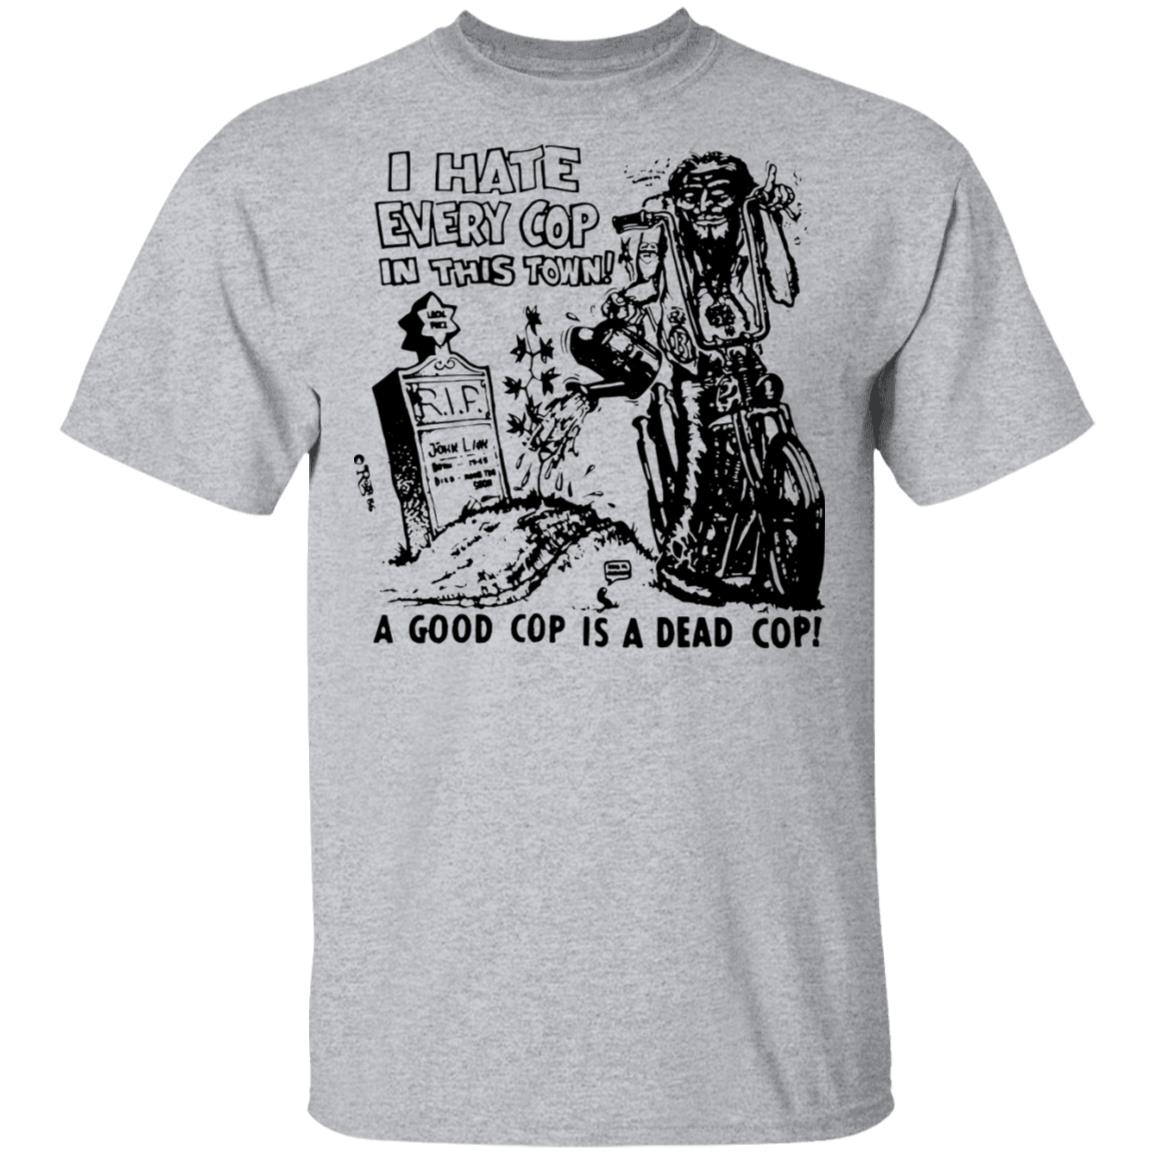 i hate every cop in this town shirt, hoodie, tank top